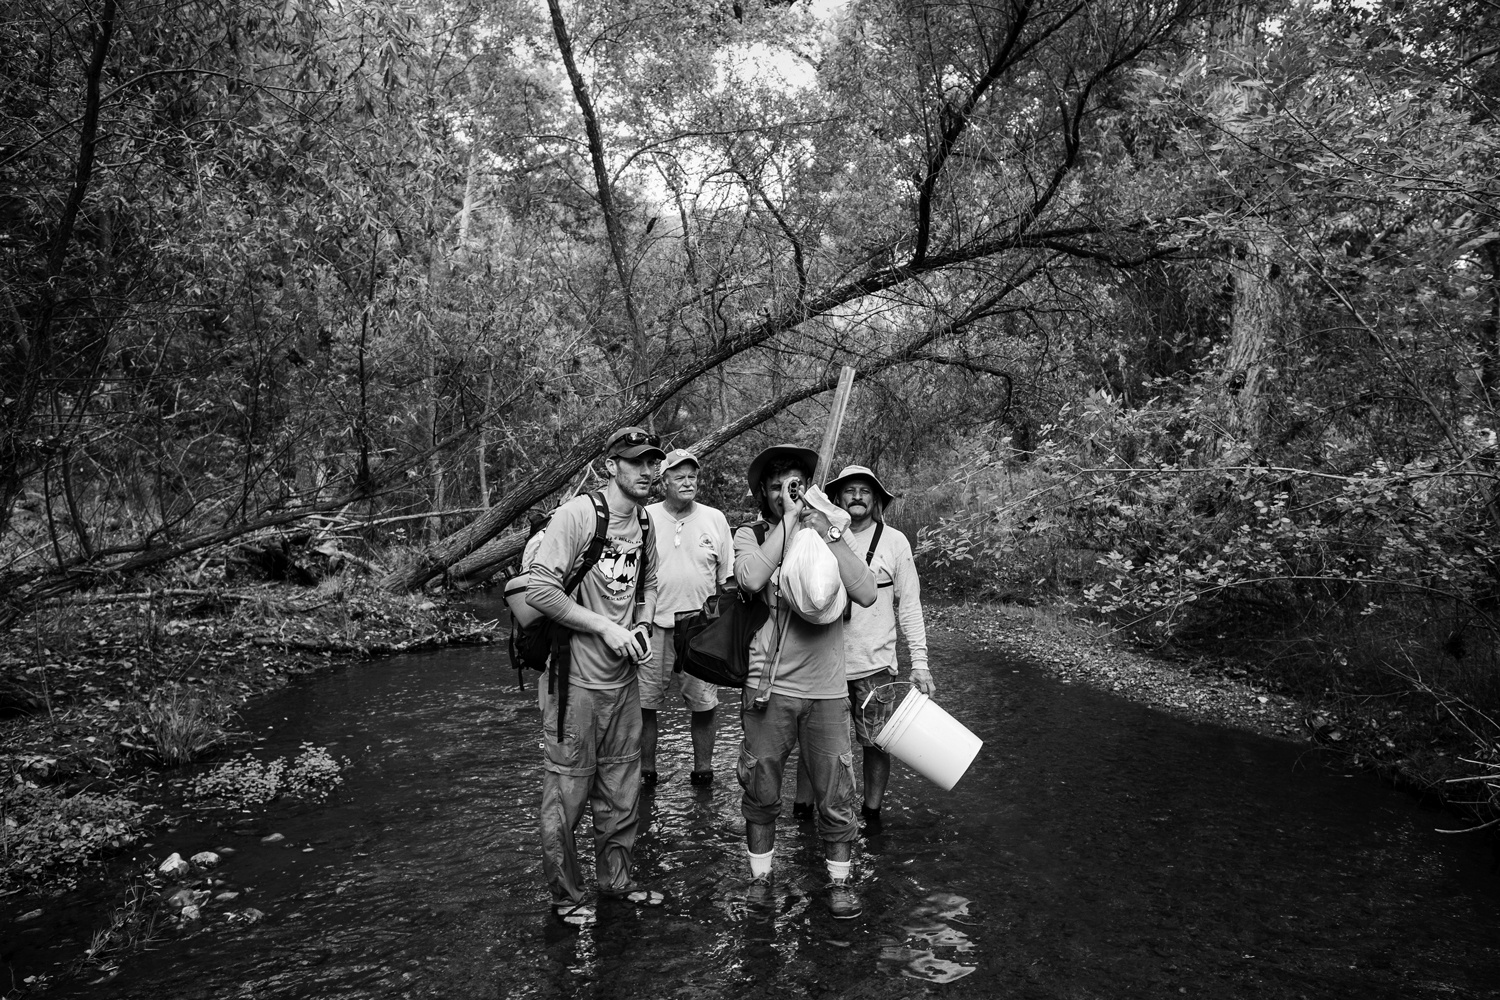 A team of four biologists doing fieldwork for the Yaqui catfish stand in a shallow stream.